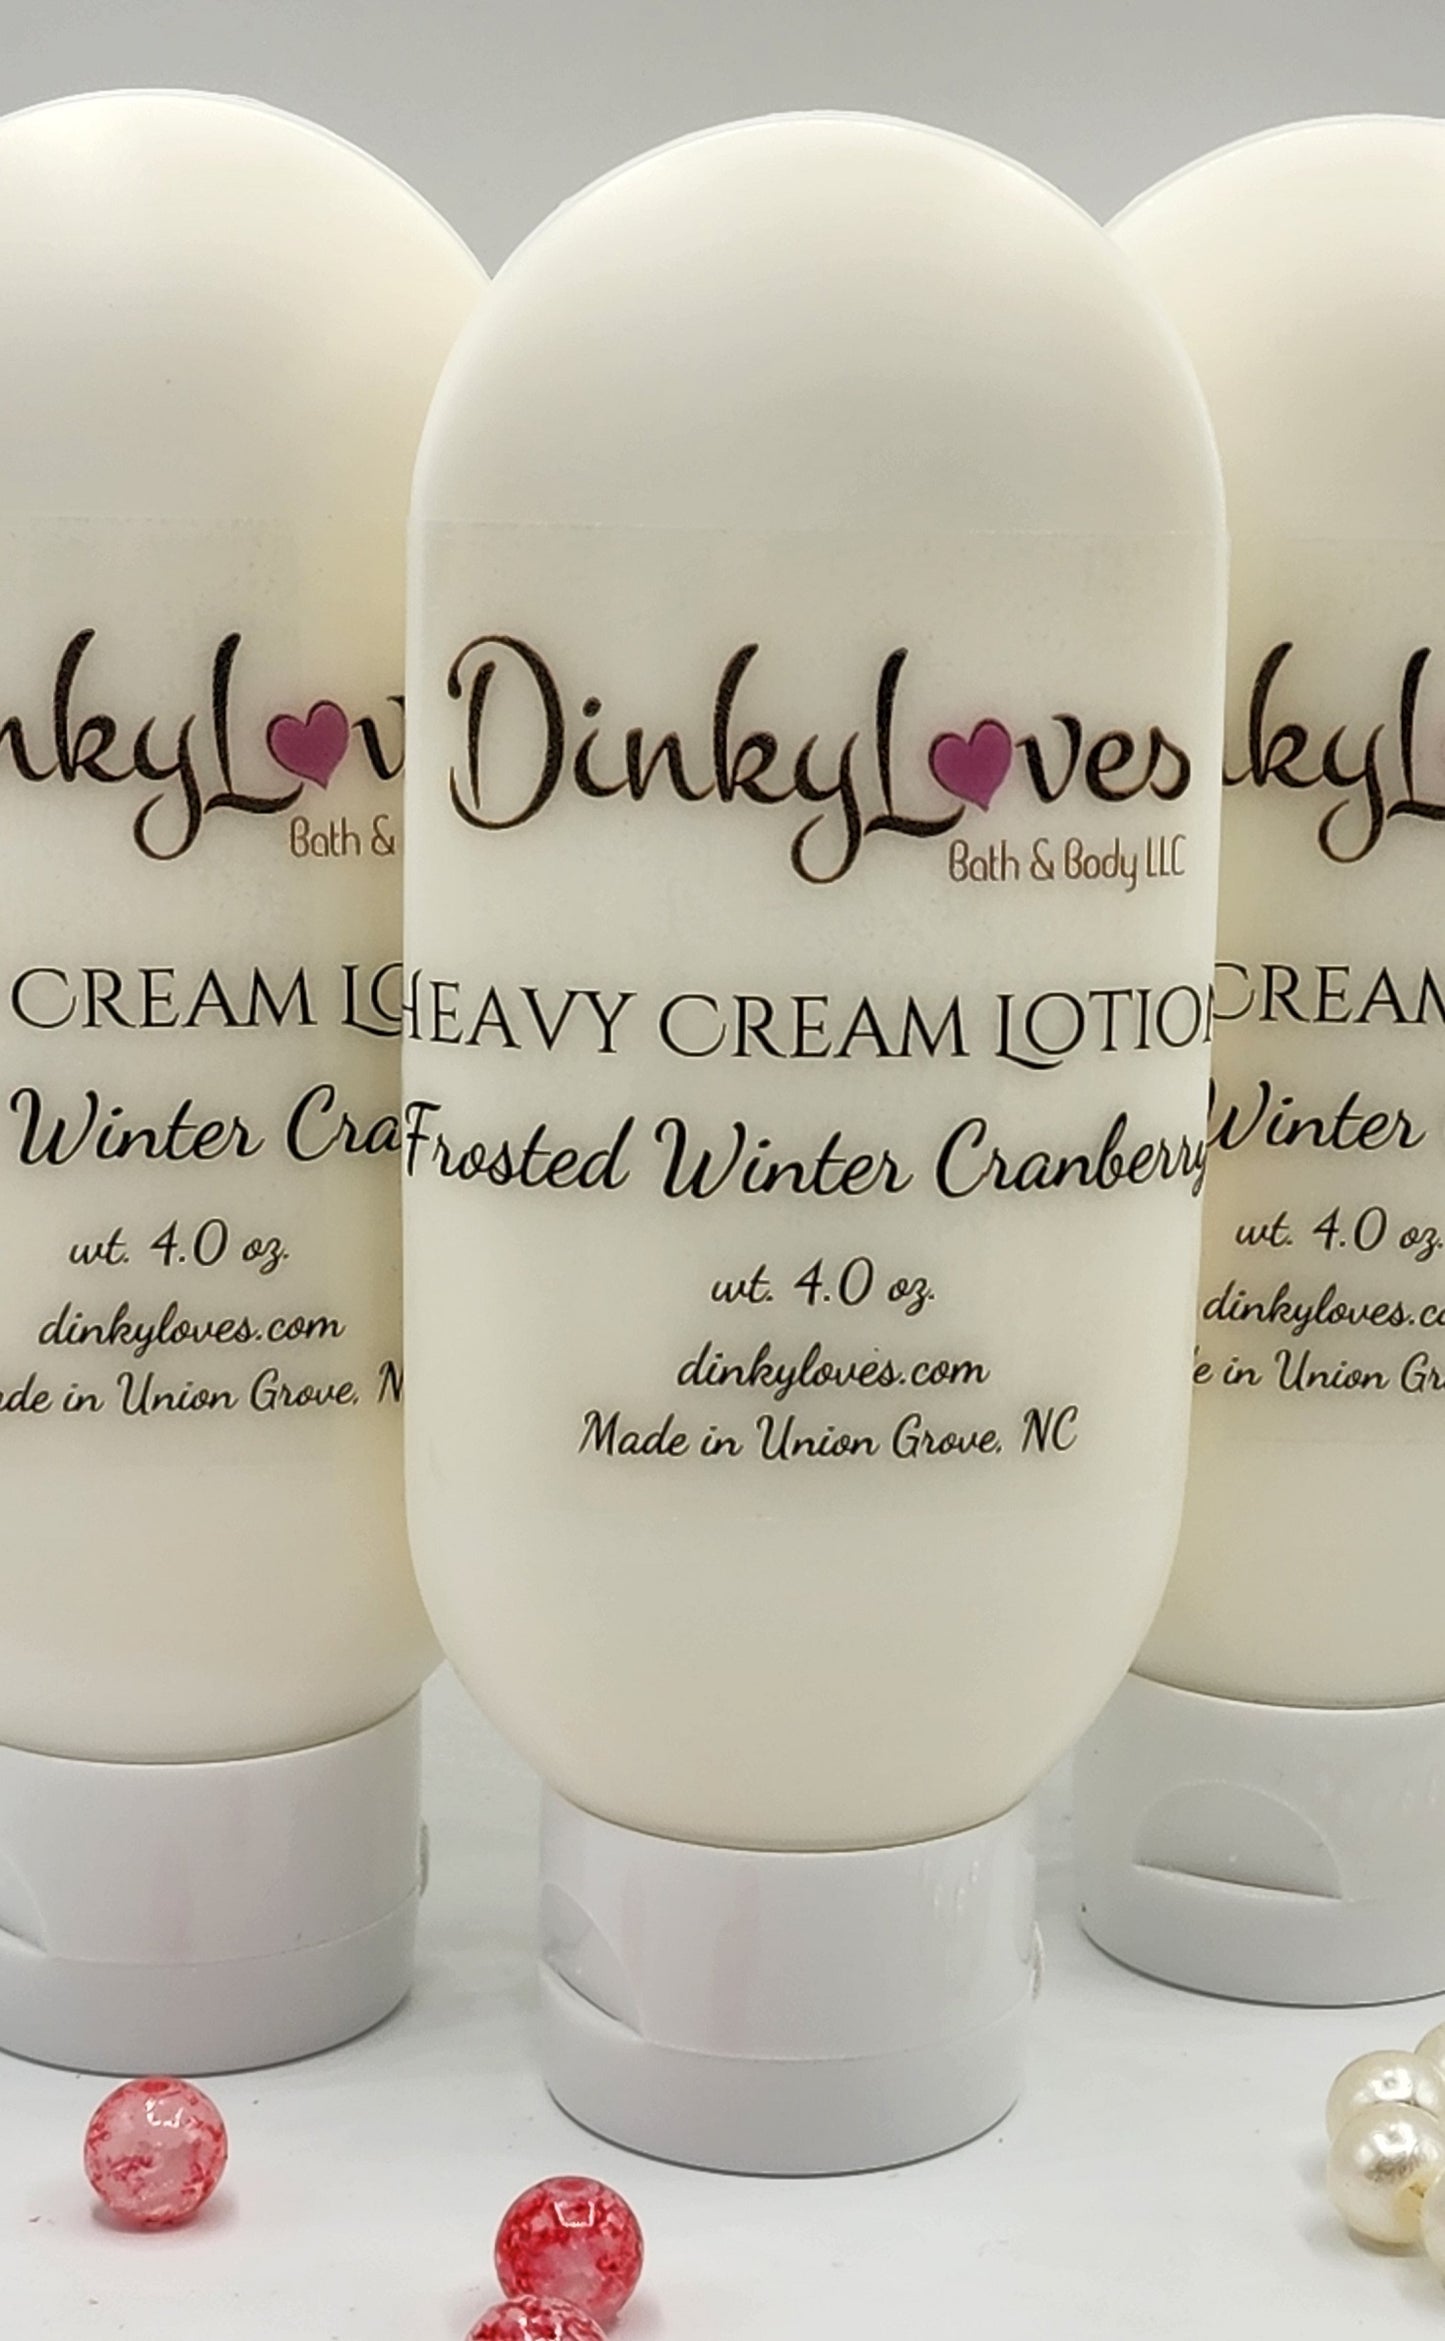 FROSTED WINTER CRANBERRY Heavy Cream Lotion / Handmade Lotion / Creamy Lotion / Purse Size Lotion